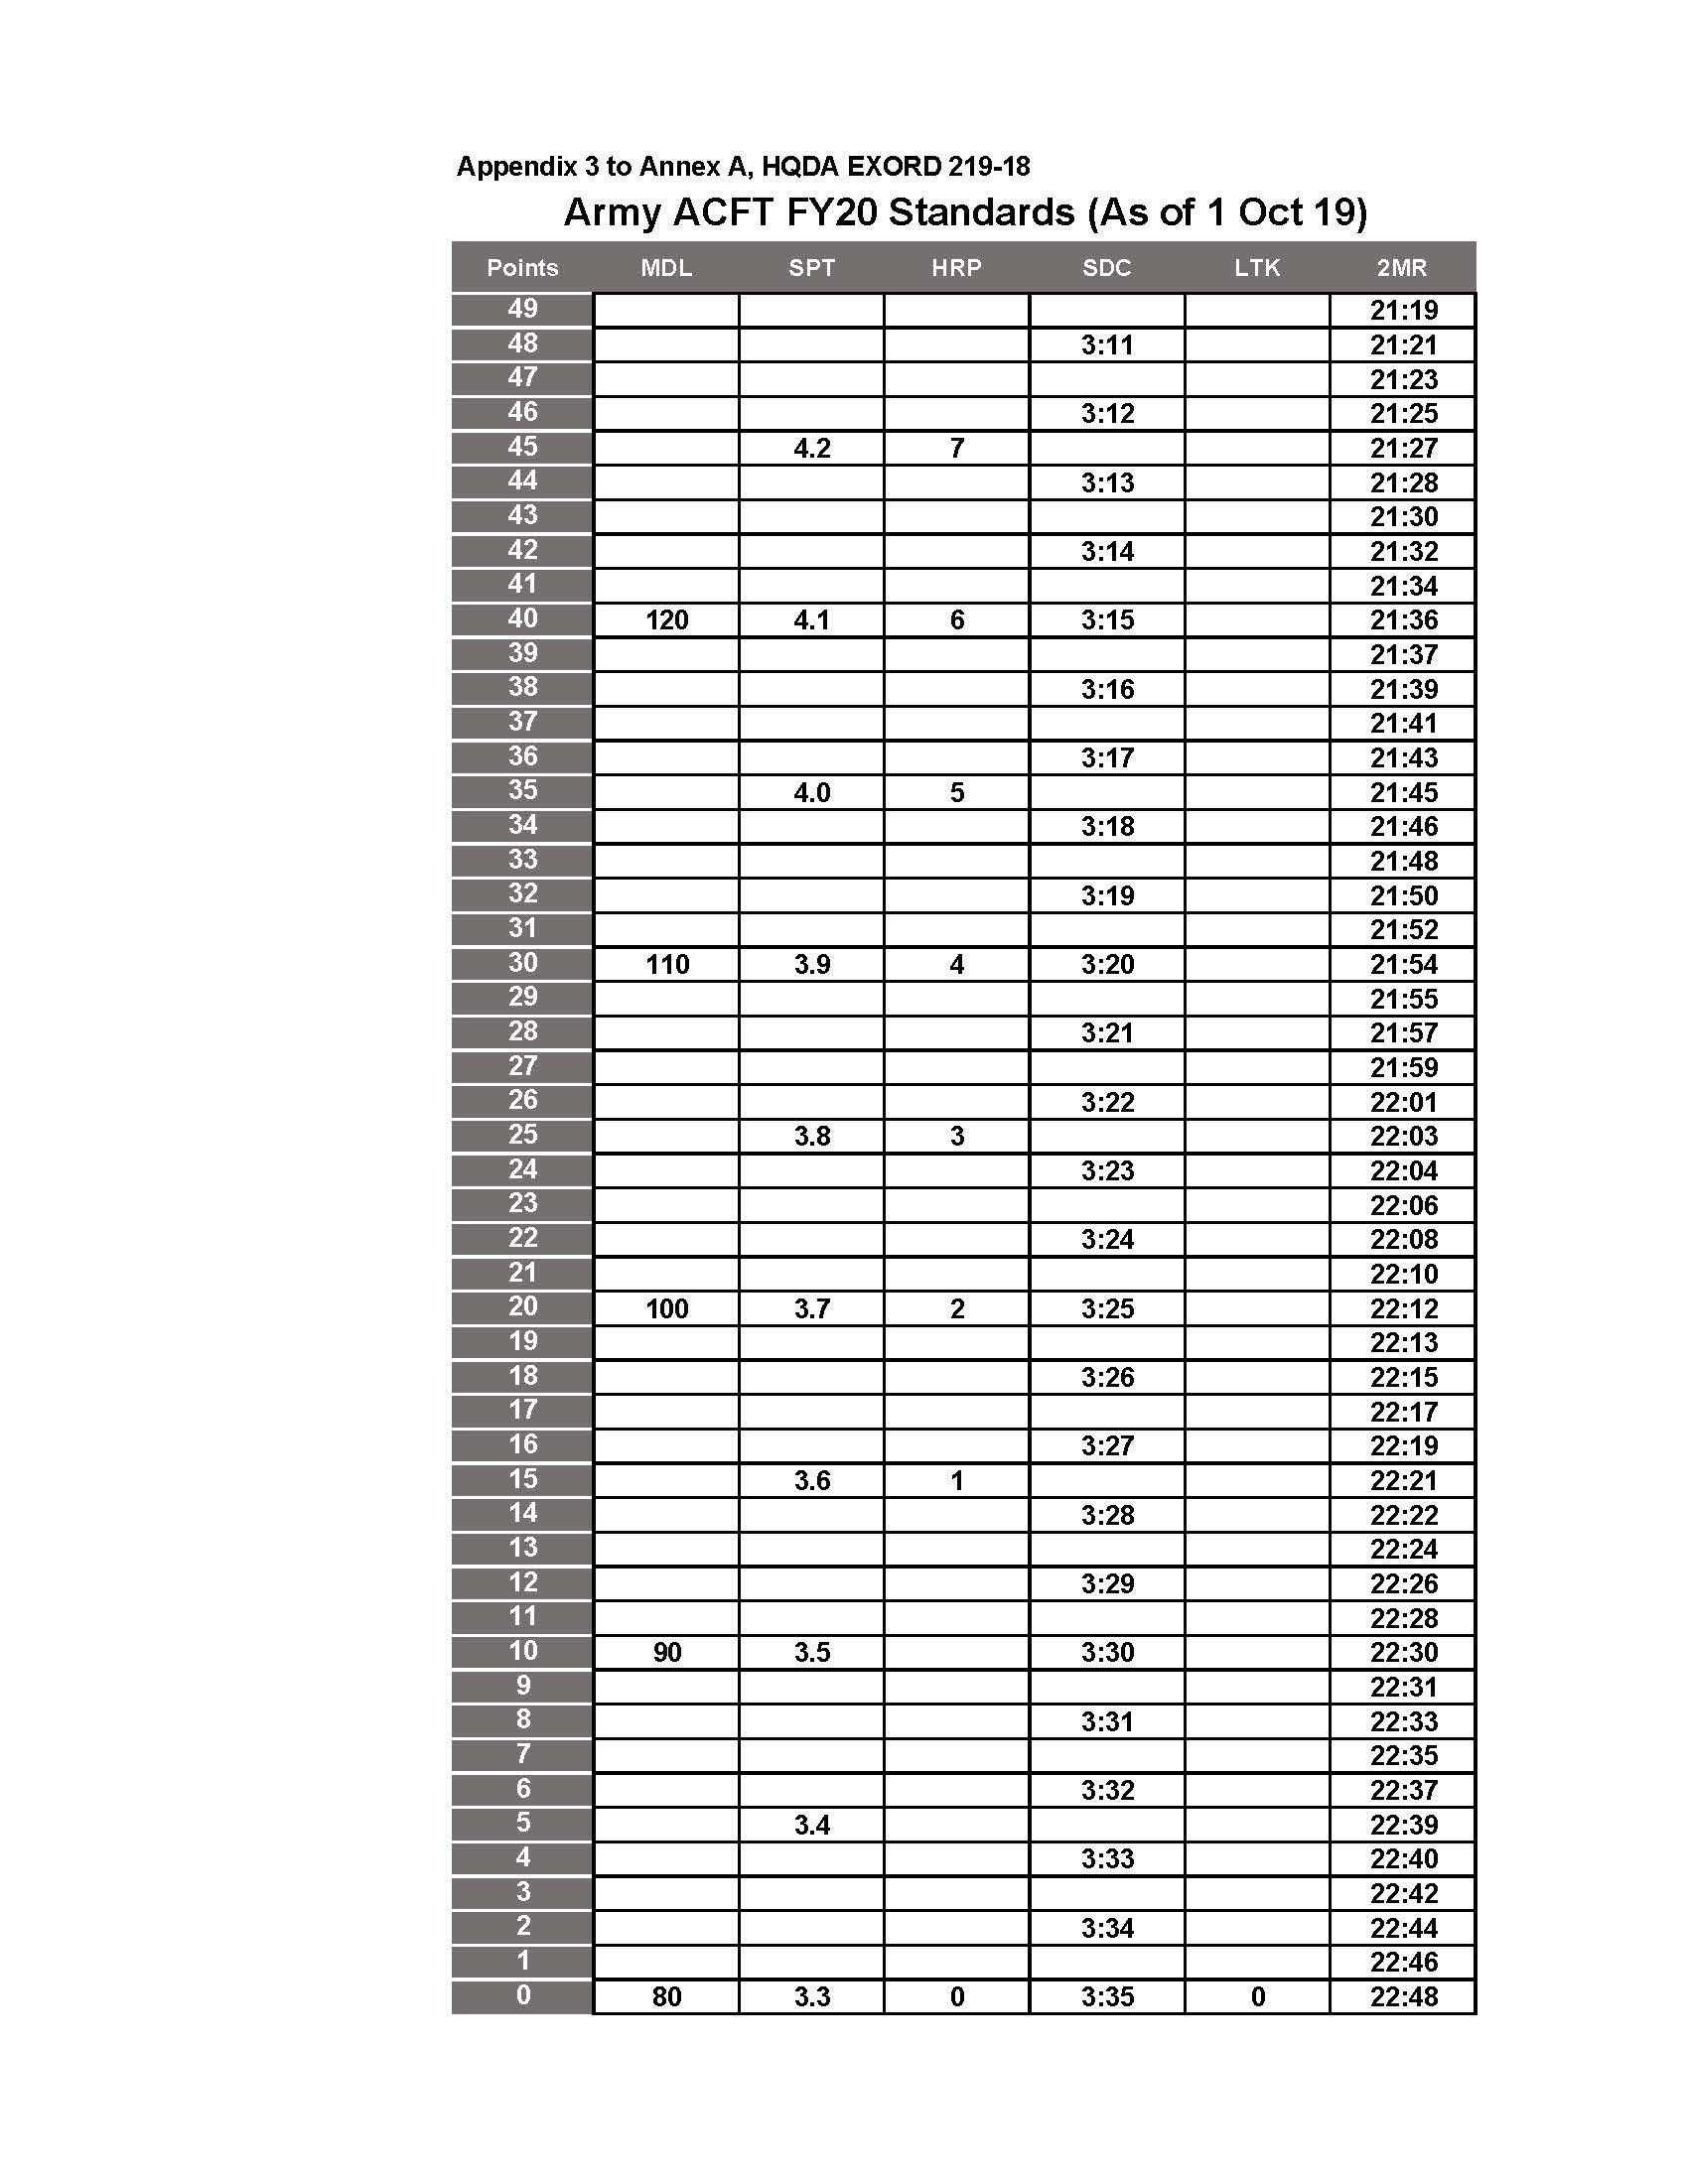 Apft Extended Scale Chart